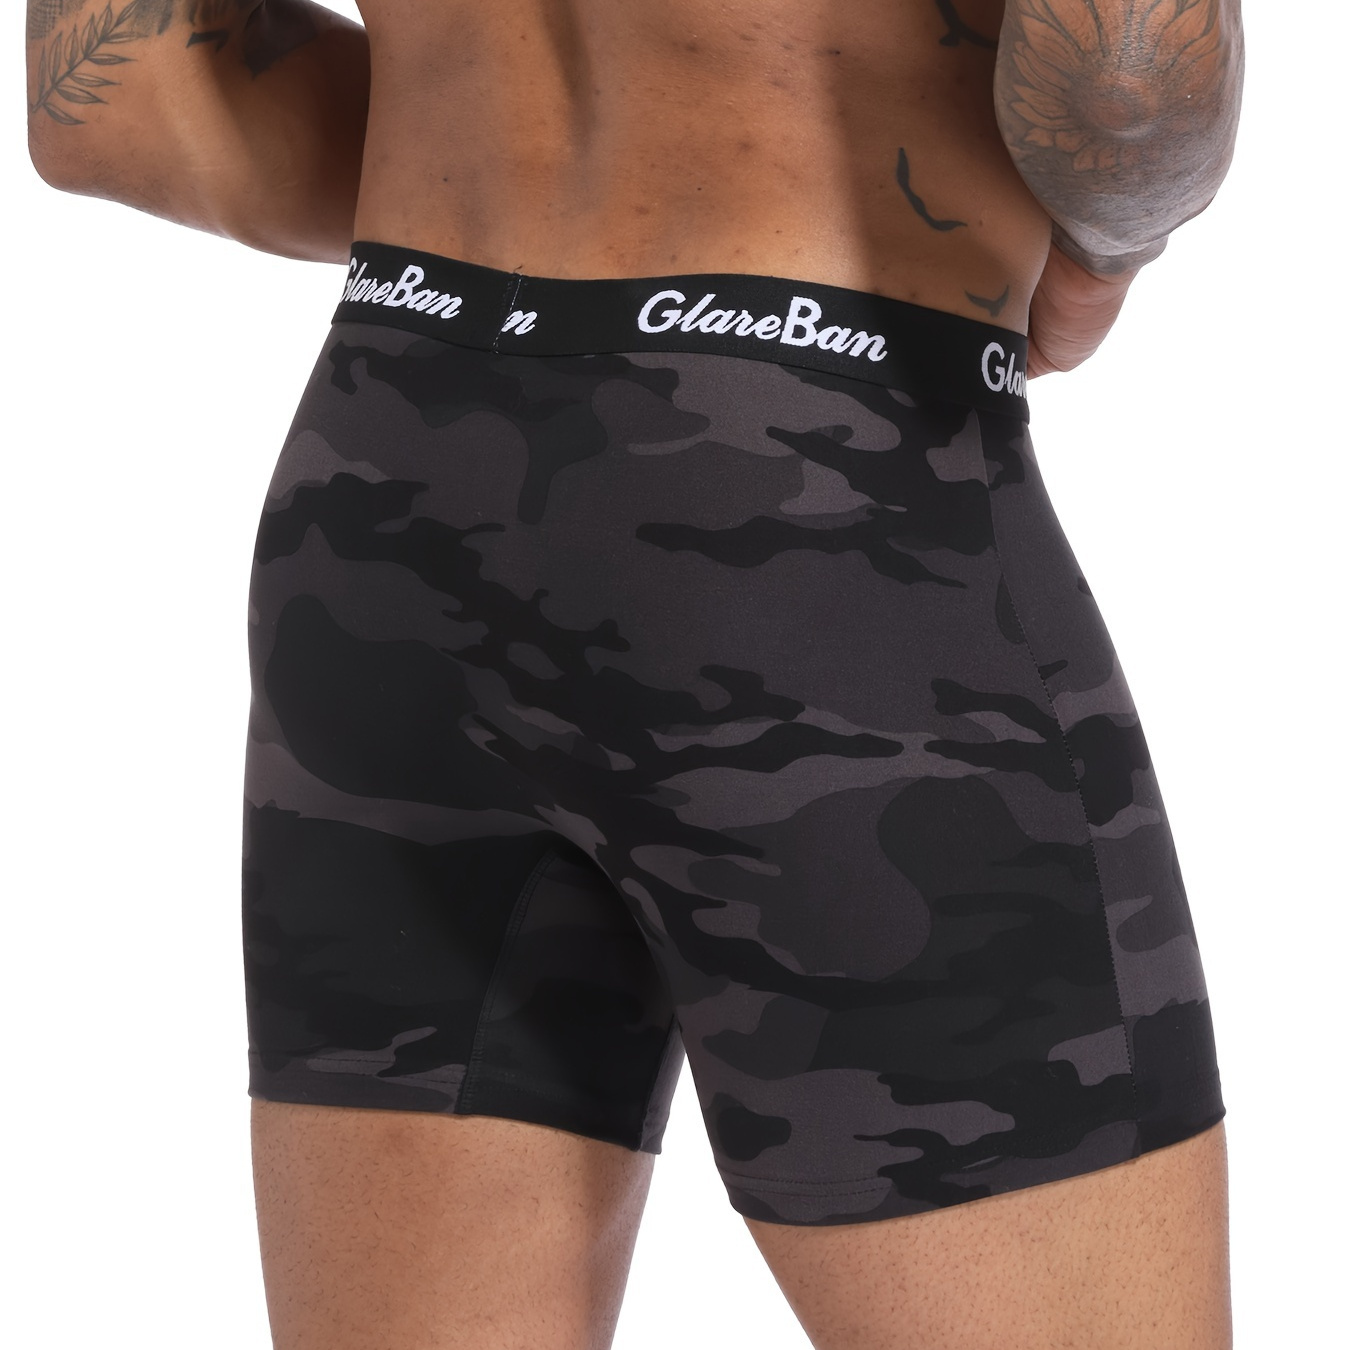 

Men's Mid-long Boxer Shorts, Black Camouflage Pattern Breathable Polyester Underwear, Comfortable Male Underpants Home Boxer Shorts